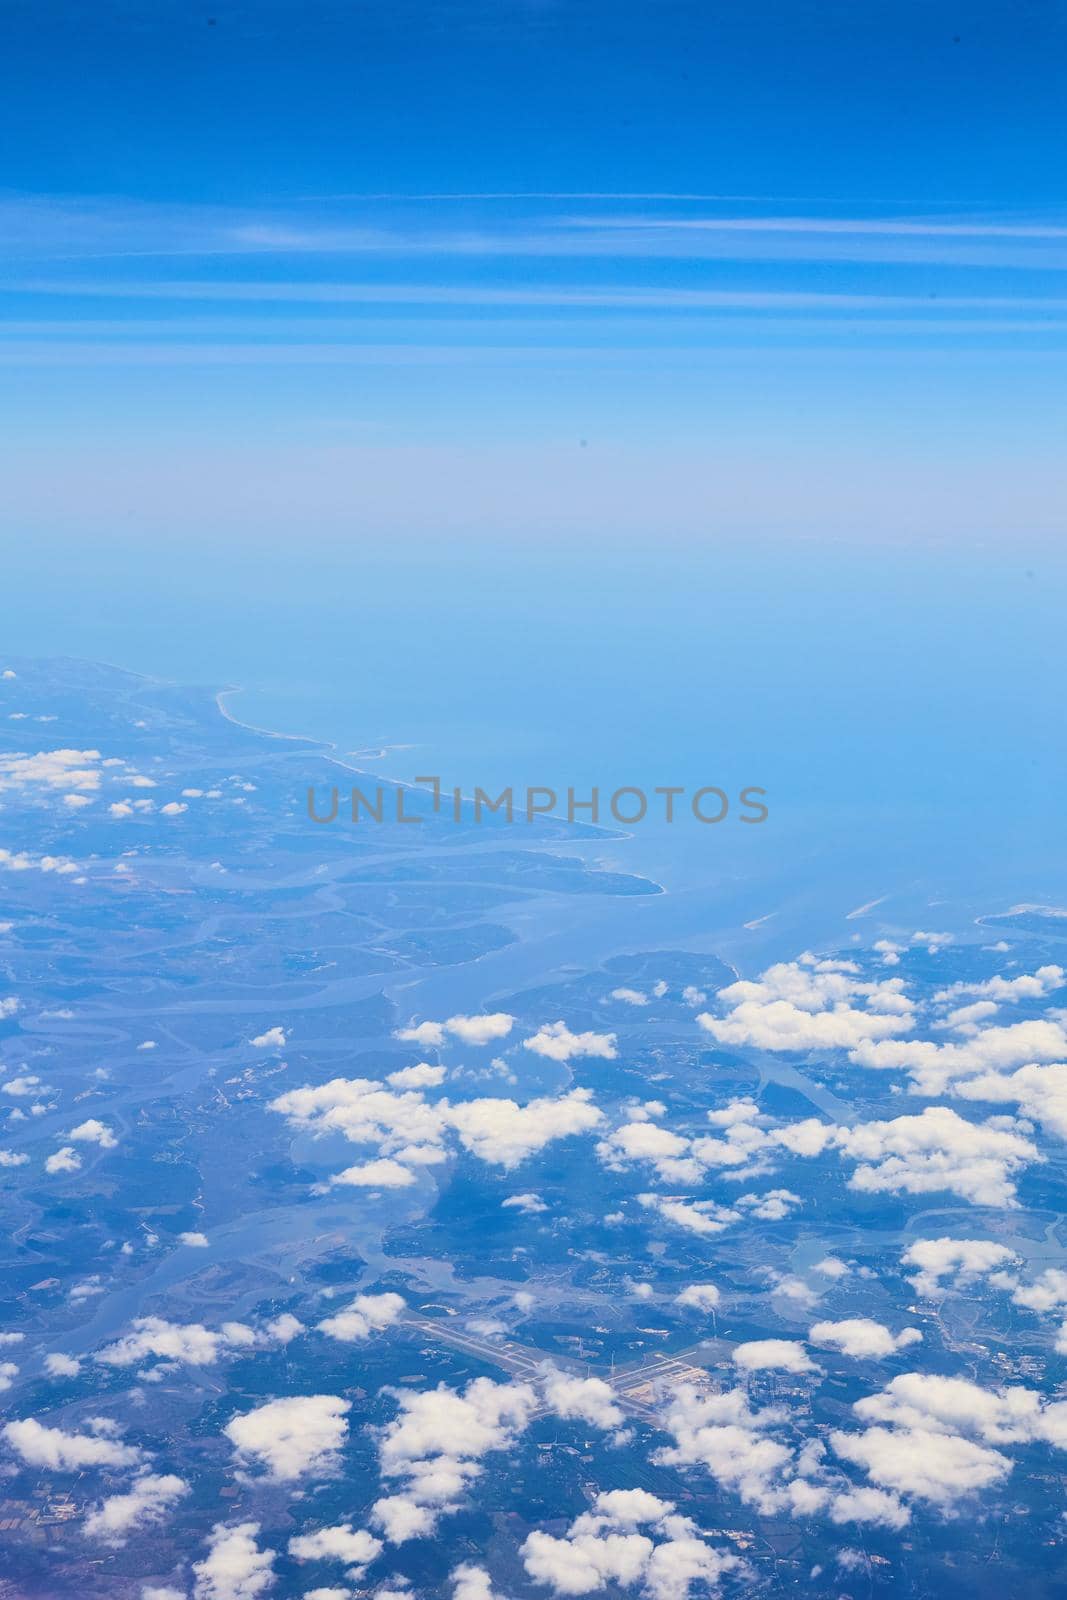 Airplane view of clouds and blue sky with land in distance by njproductions